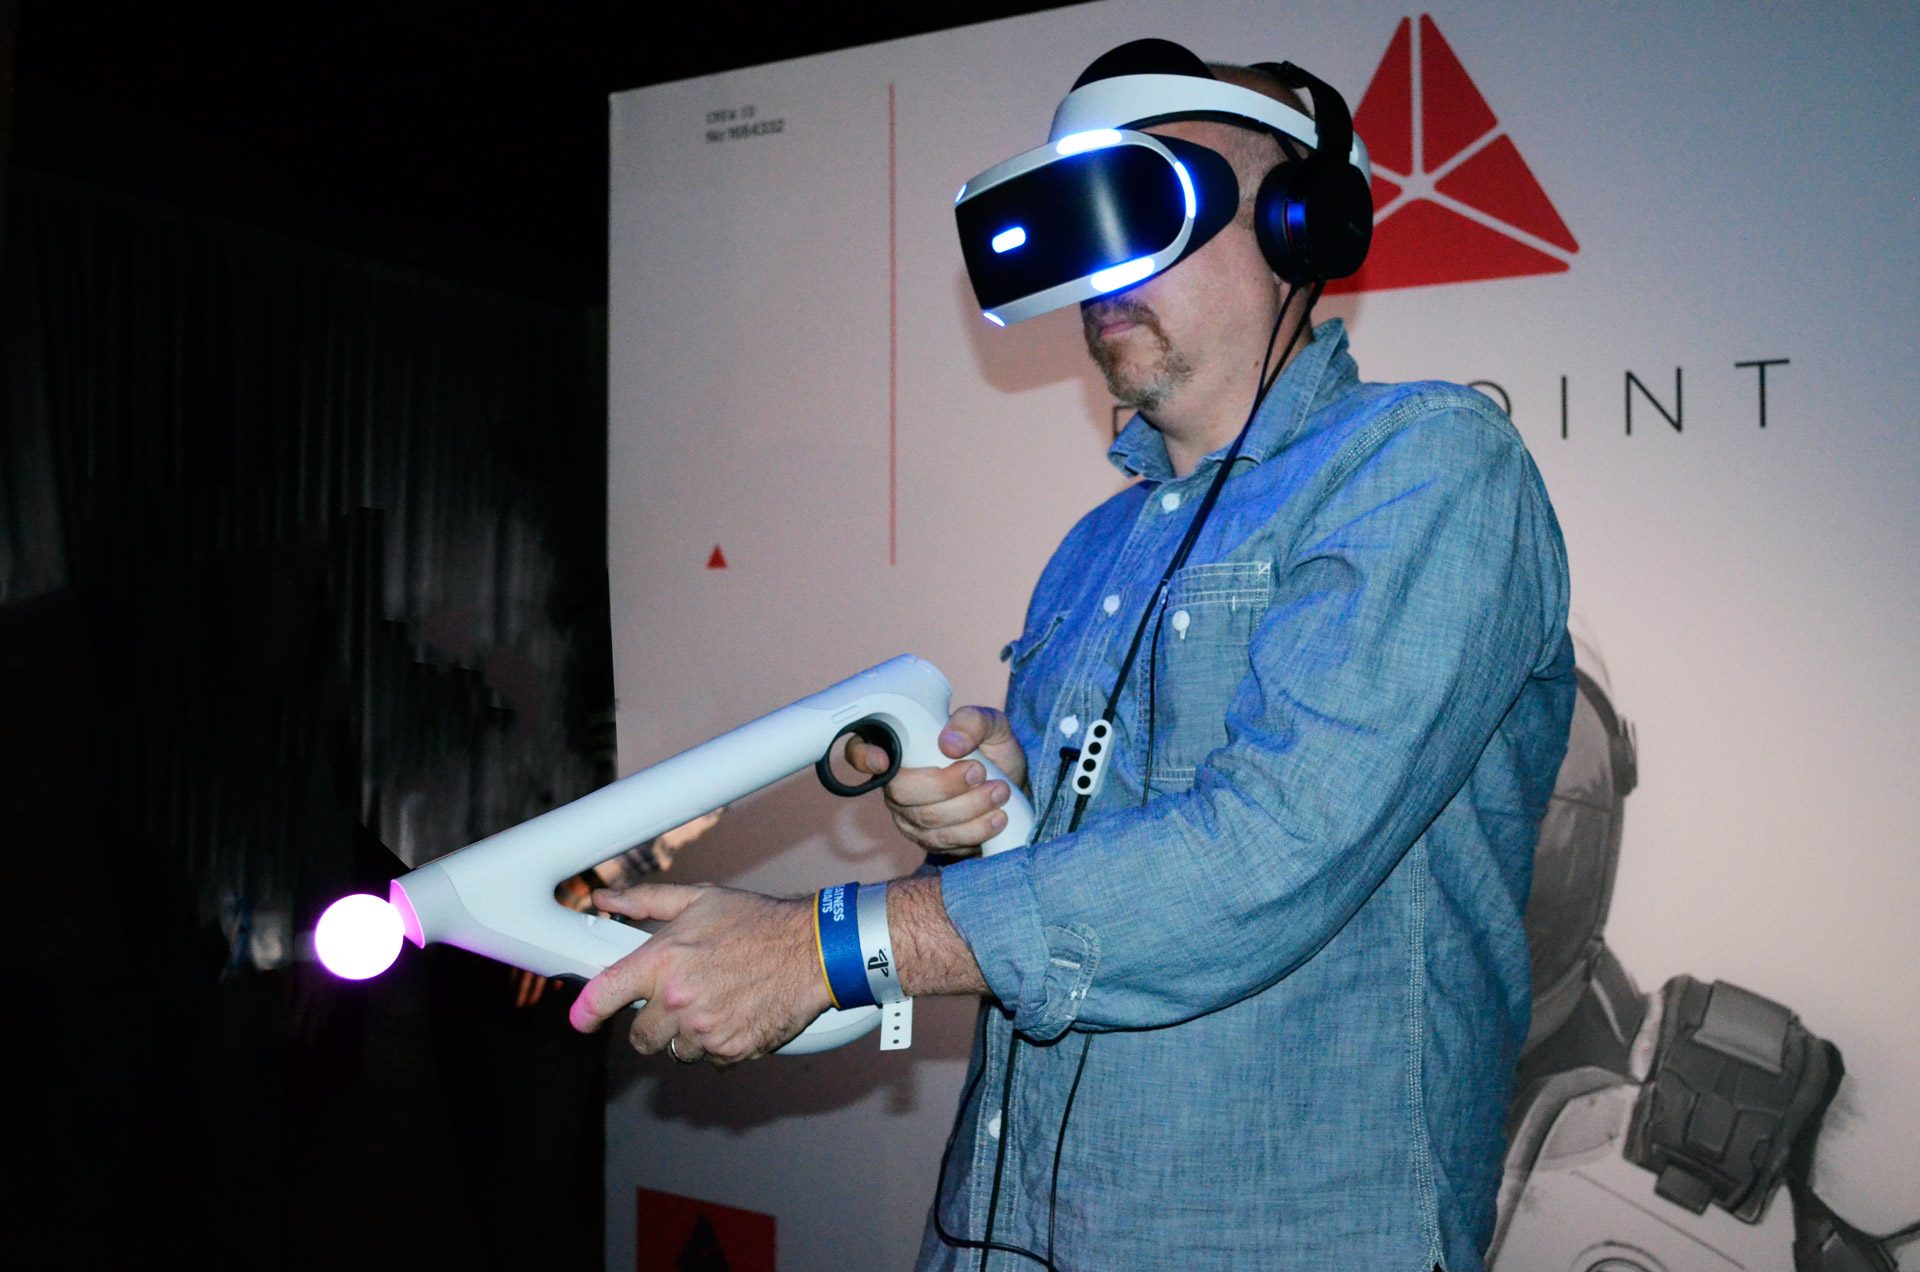 Hands-on: 'PSVR Aim' Controller Debuts with 'Farpoint' FPS